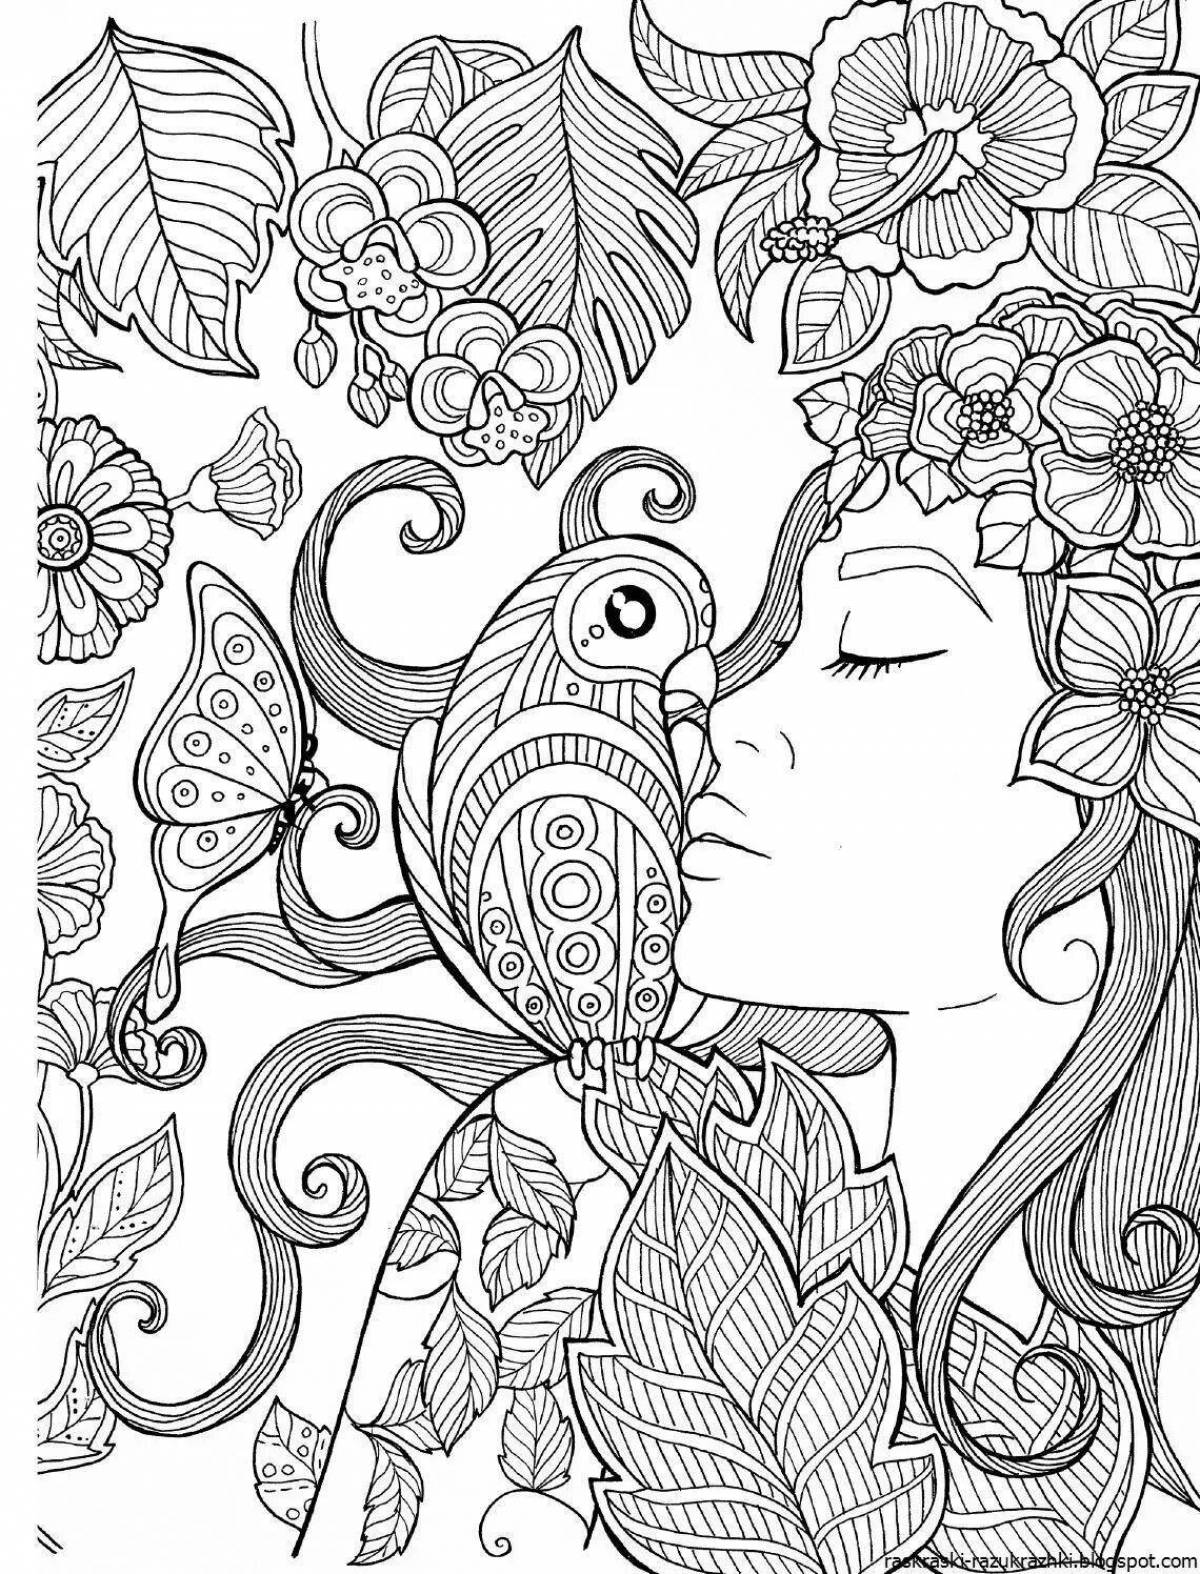 Sublime coloring page adult ru beautiful